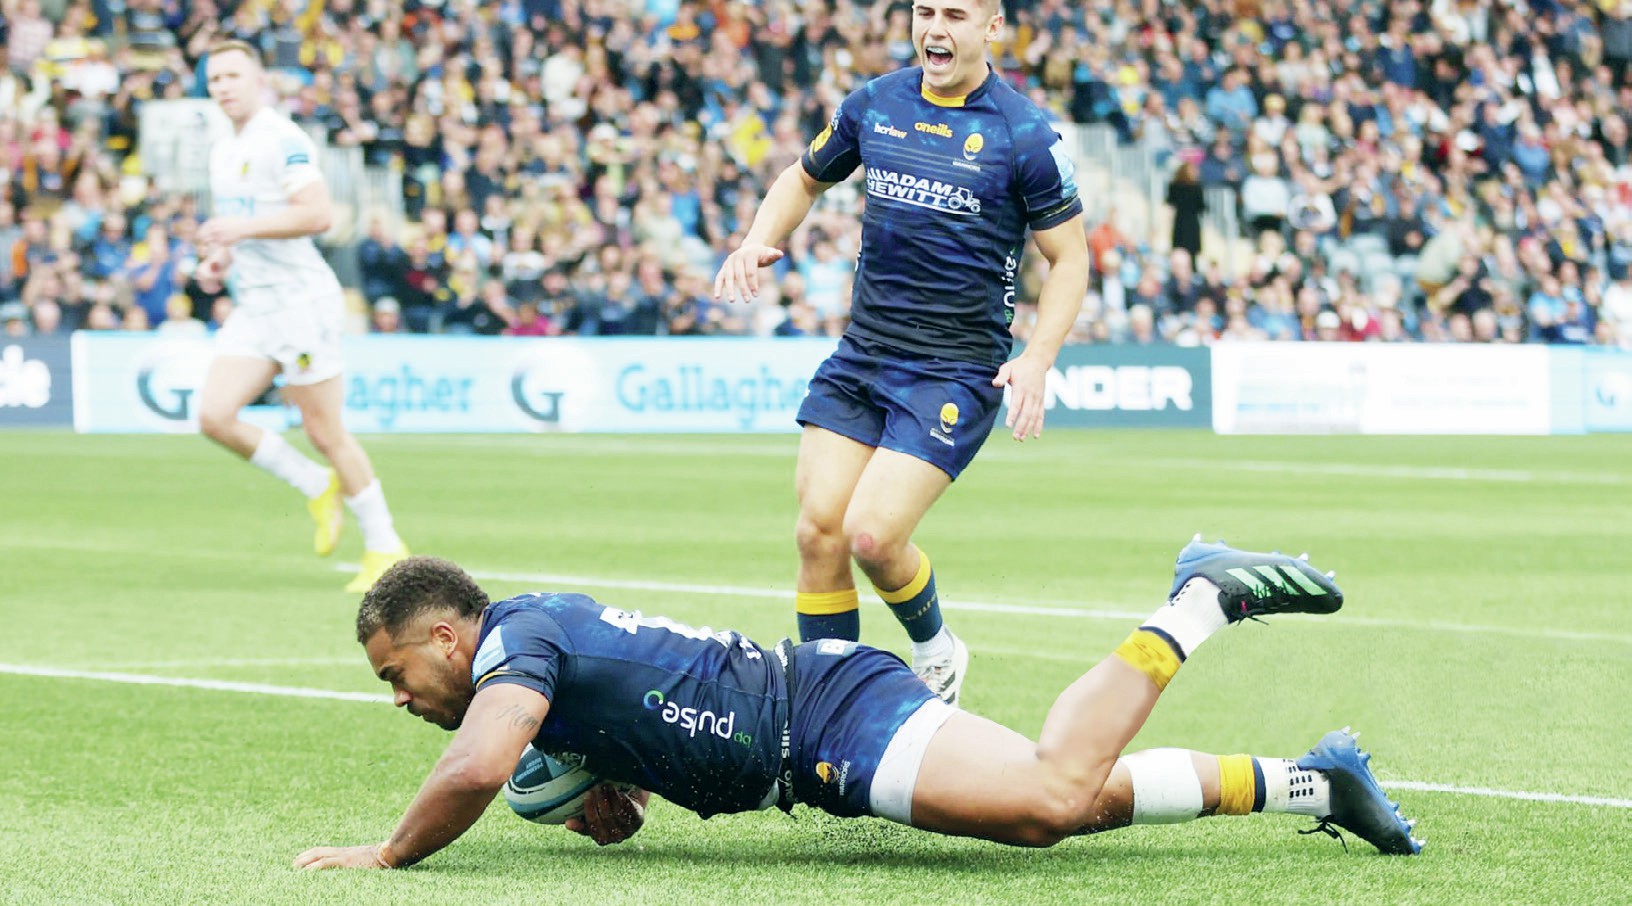 We want Worcester to play at Sixways again